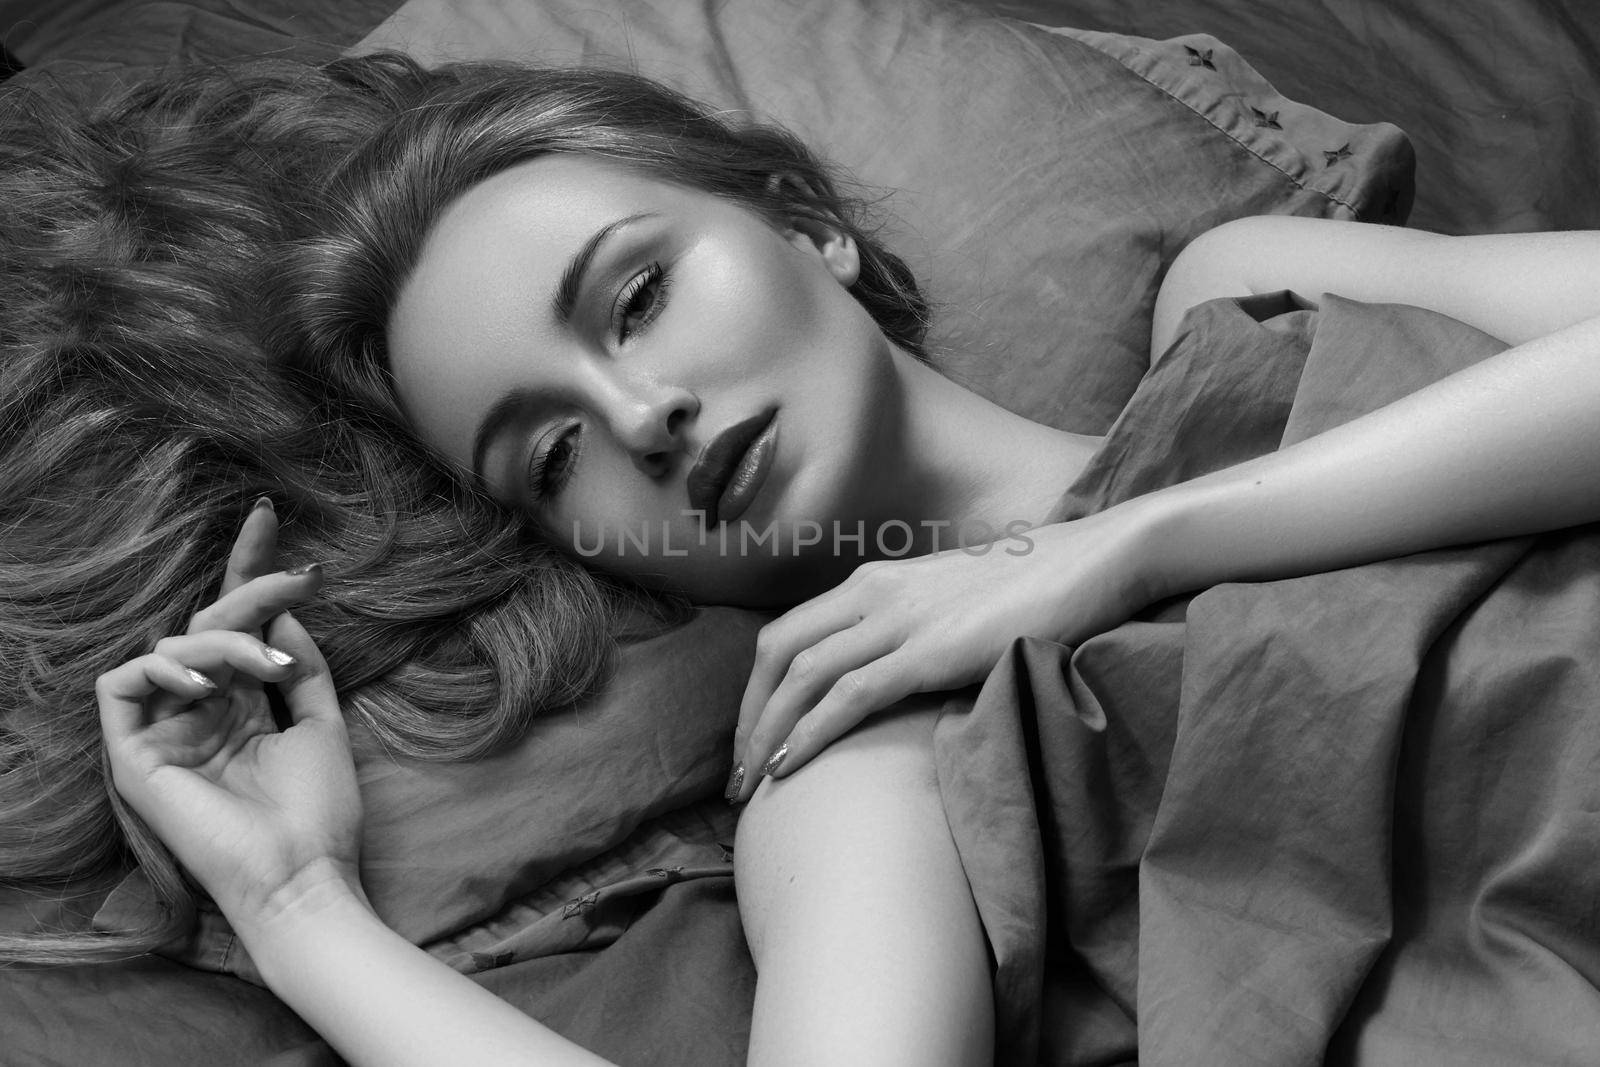 Beautiful Woman Sleeping while lying in Bed with Comfort. Sweet dreams. Sexy Beauty Model relaxing in Bedroom. Black and White